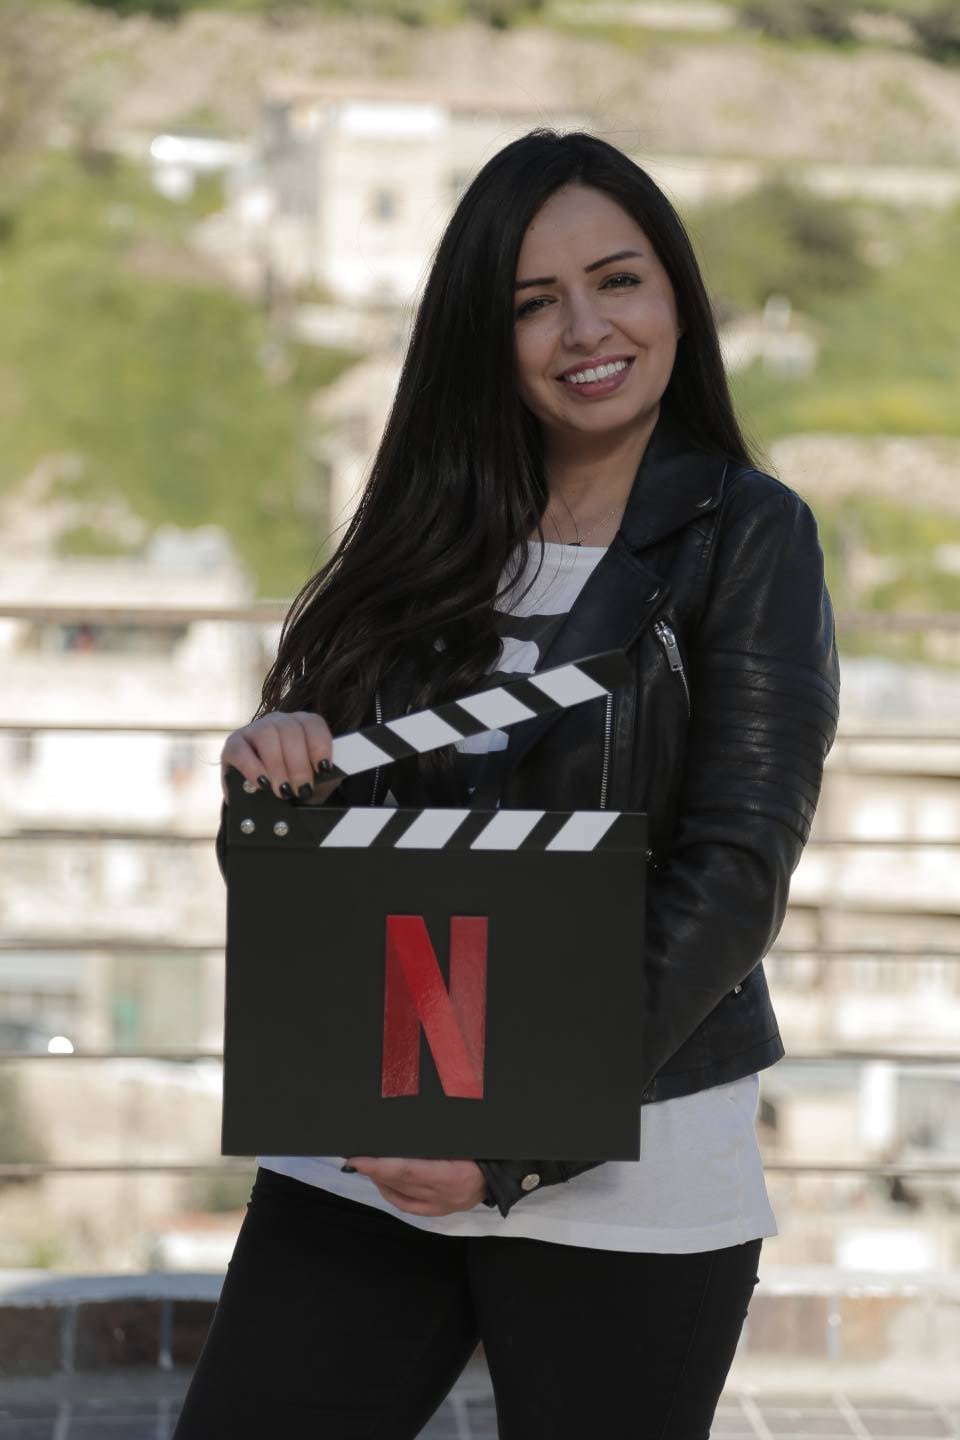 Tima Shomali, director of AlRawabi School for Girls, appeared at the Red Sea International Film Festival in support of the Netflix initiative Because She Created. Photo: Netflix